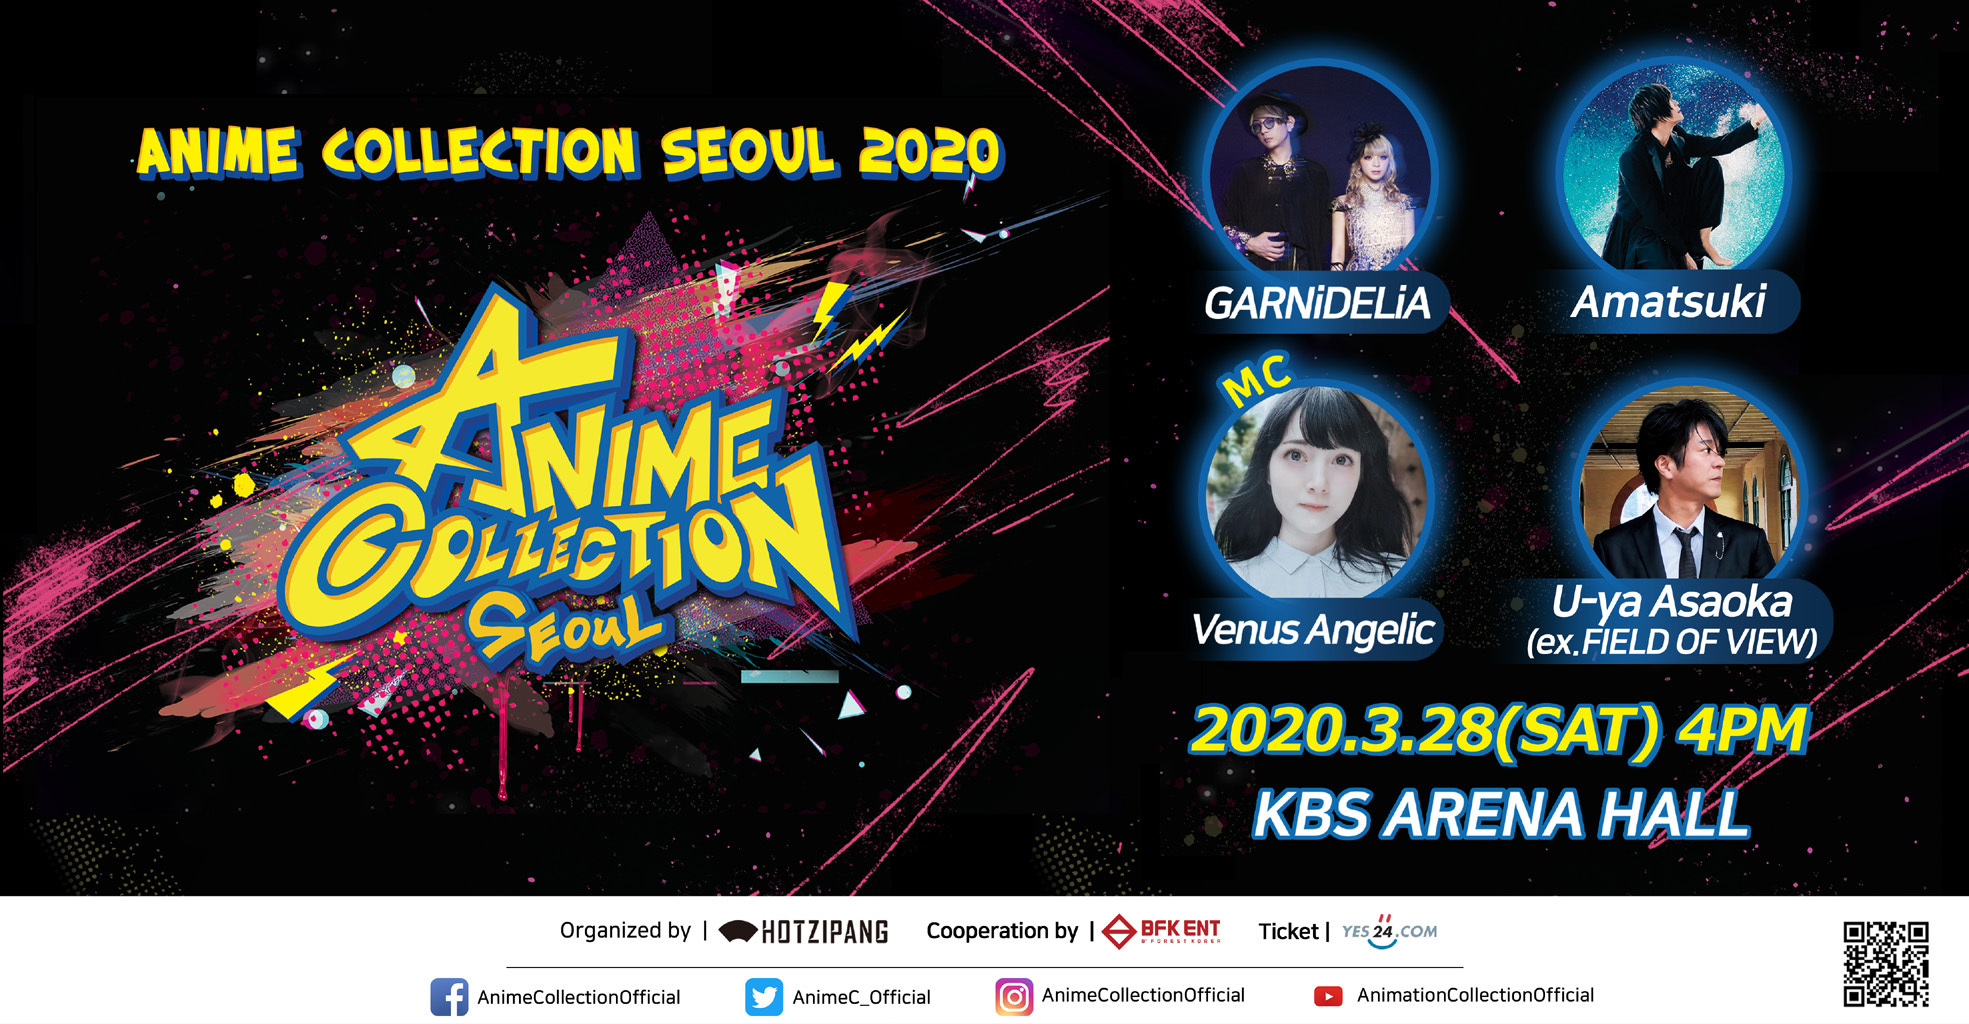 Anime Collection Seoul 出演 天月 Official Web Site